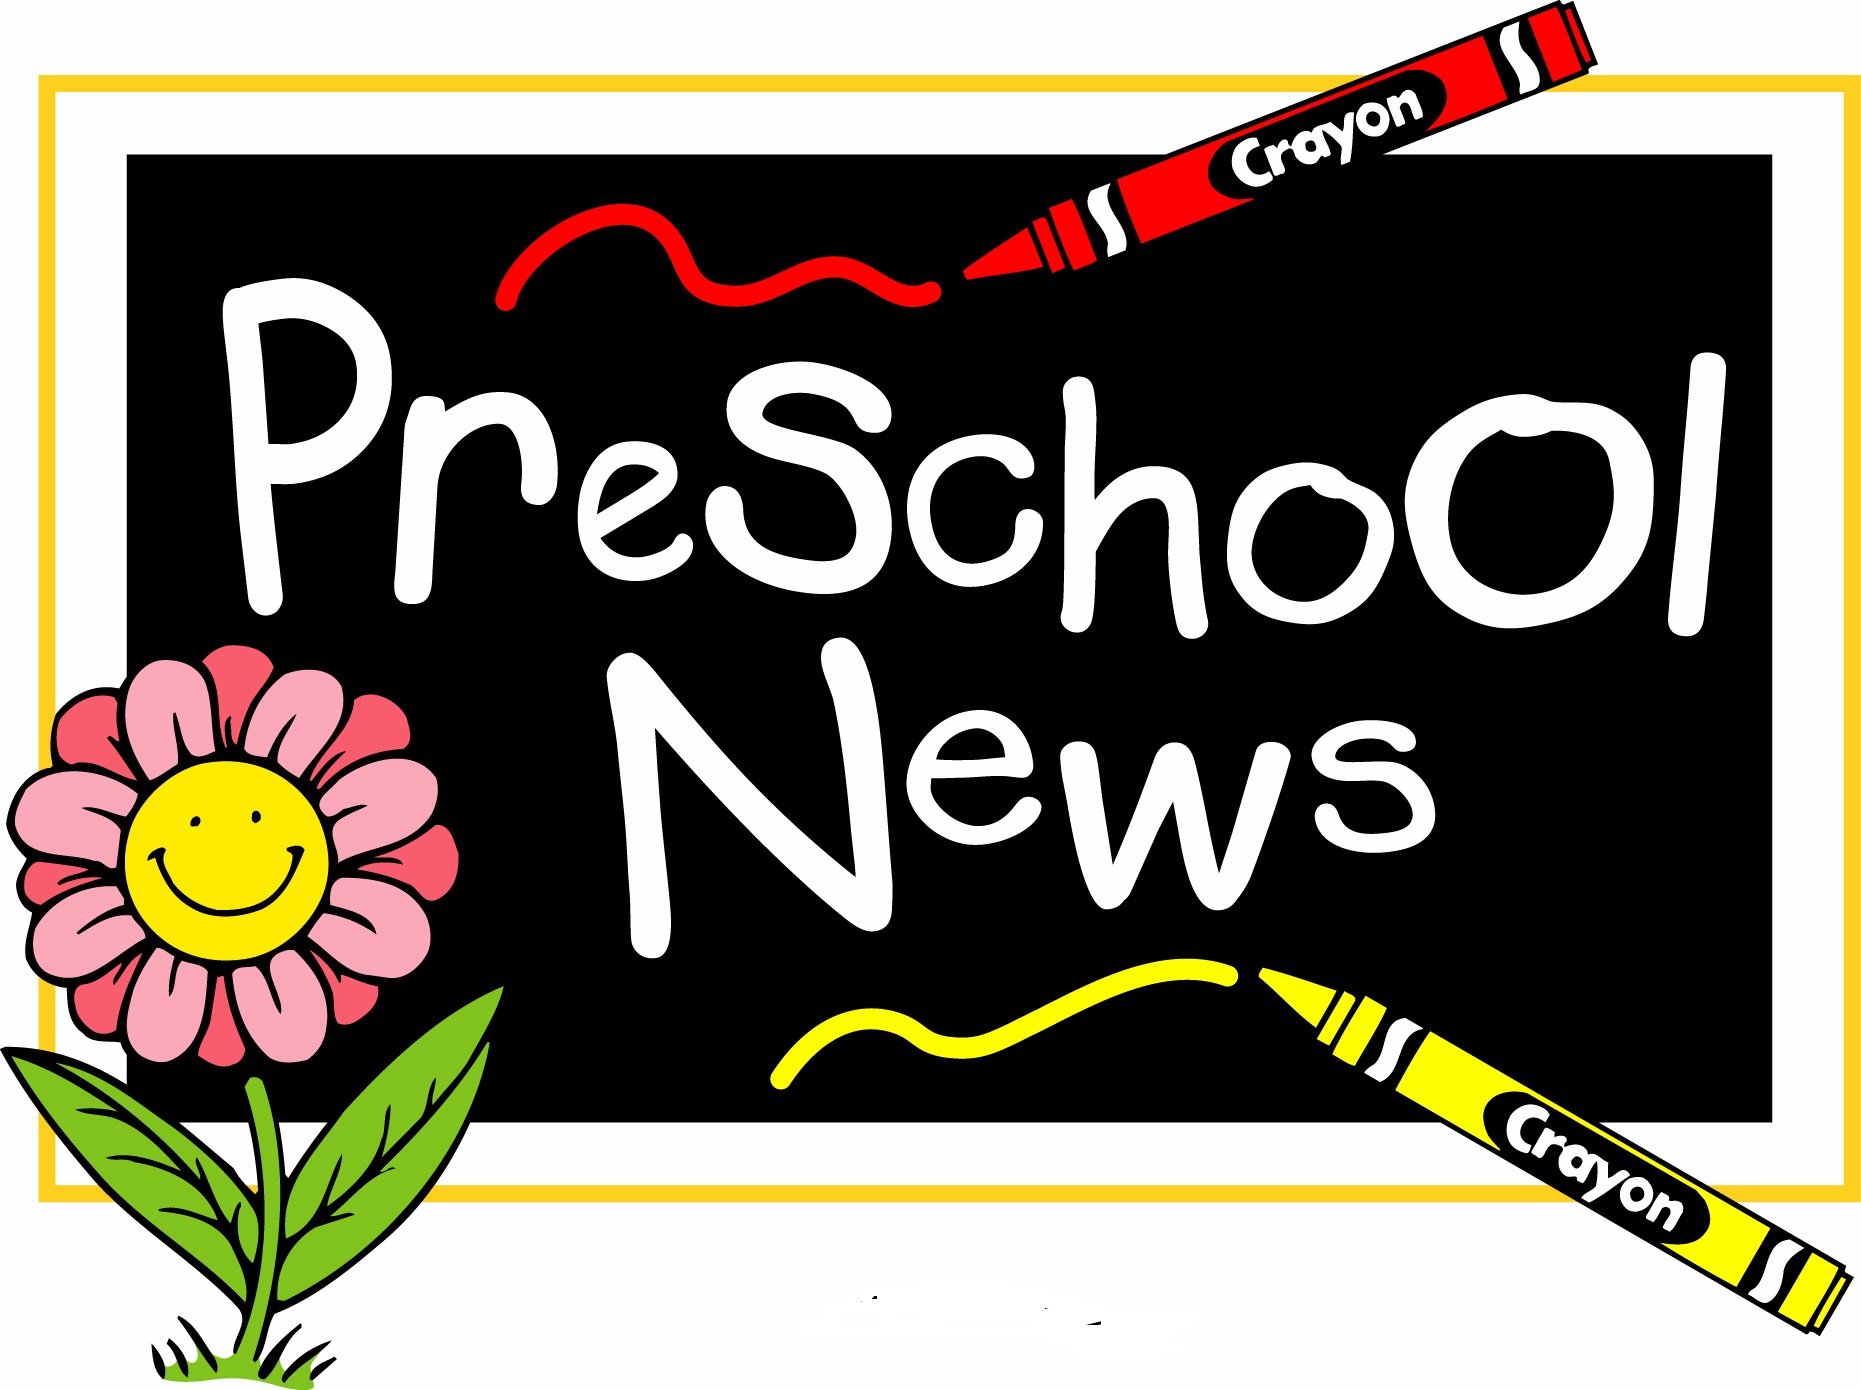 Image clipart daycare news